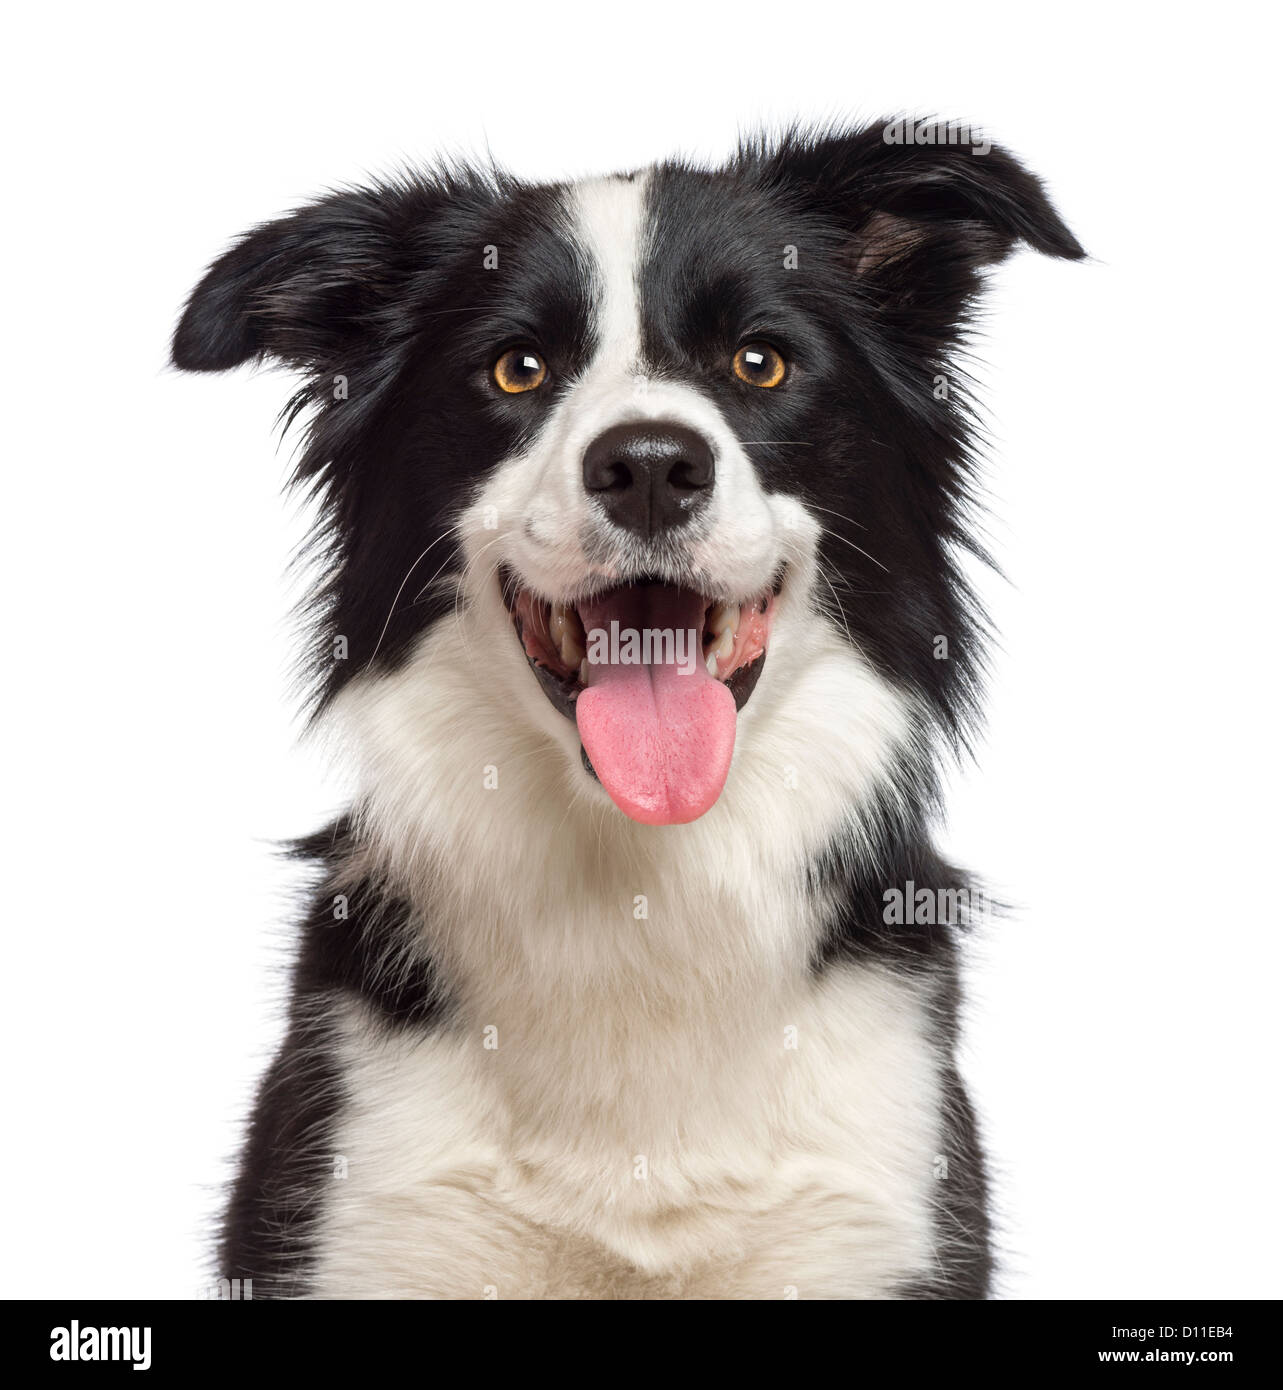 Border Collie, 1.5 year old, looking at camera against white background Stock Photo